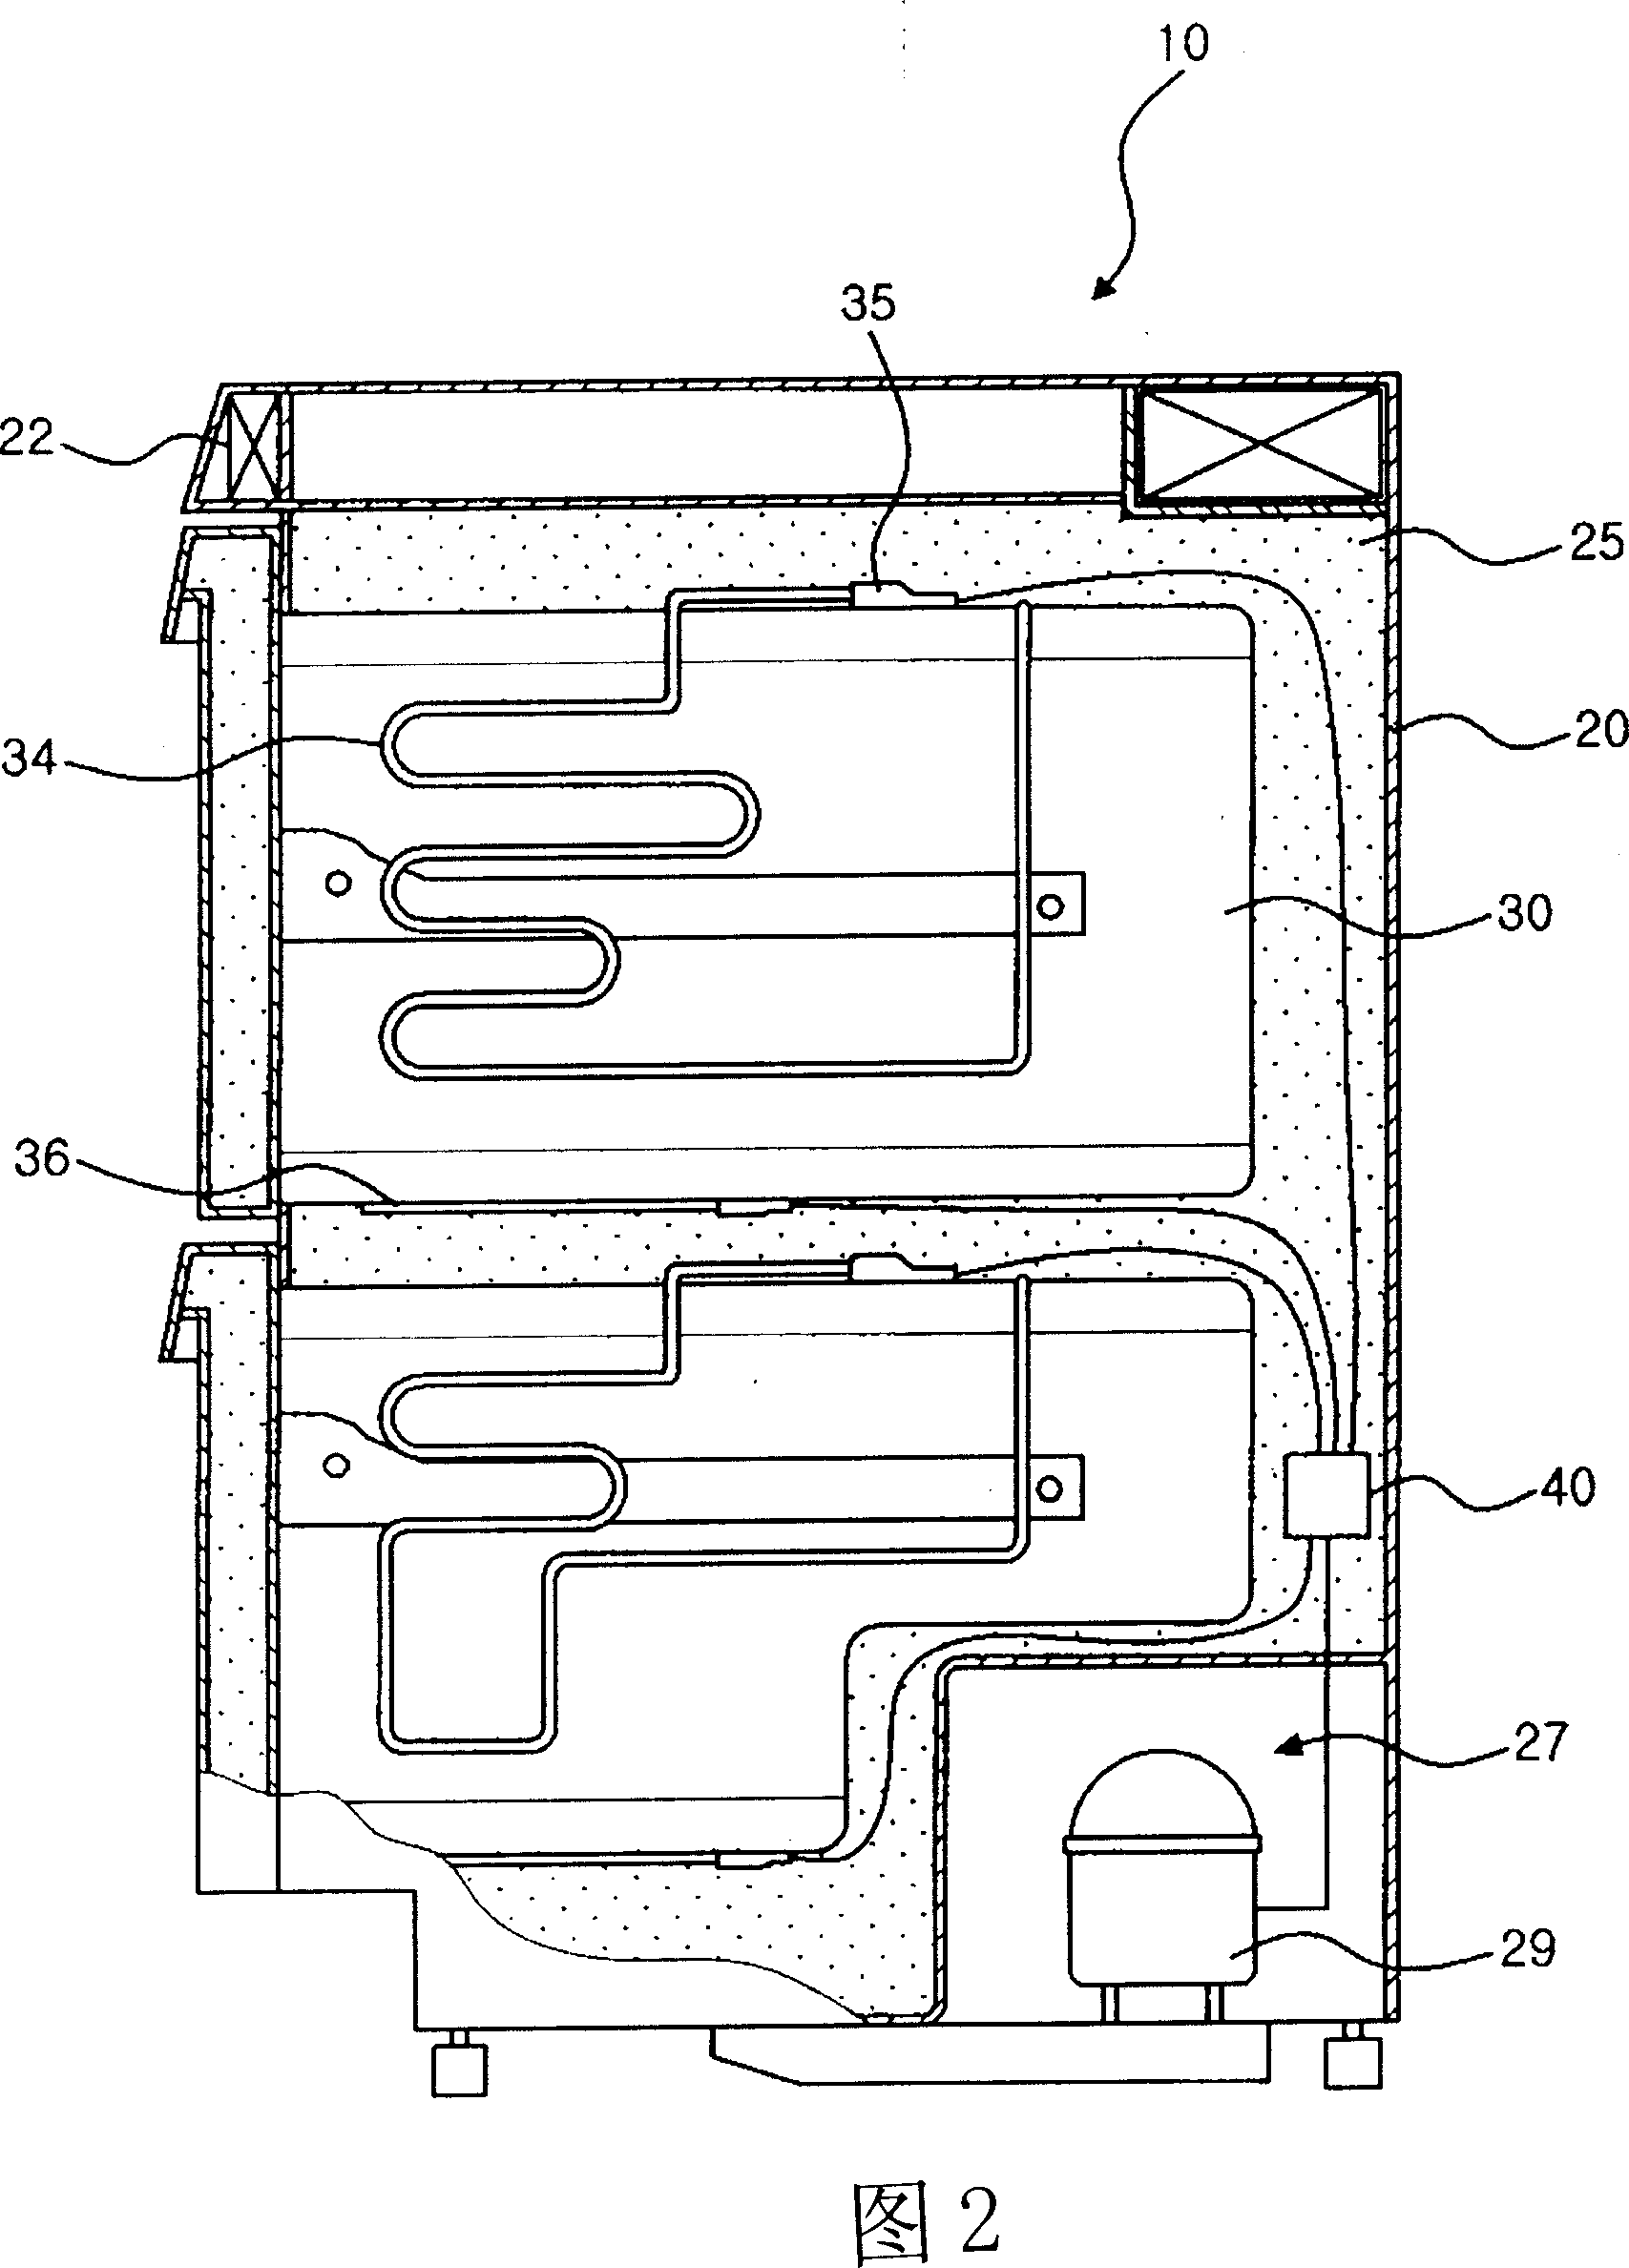 Masking structure of wire box of refrigerator